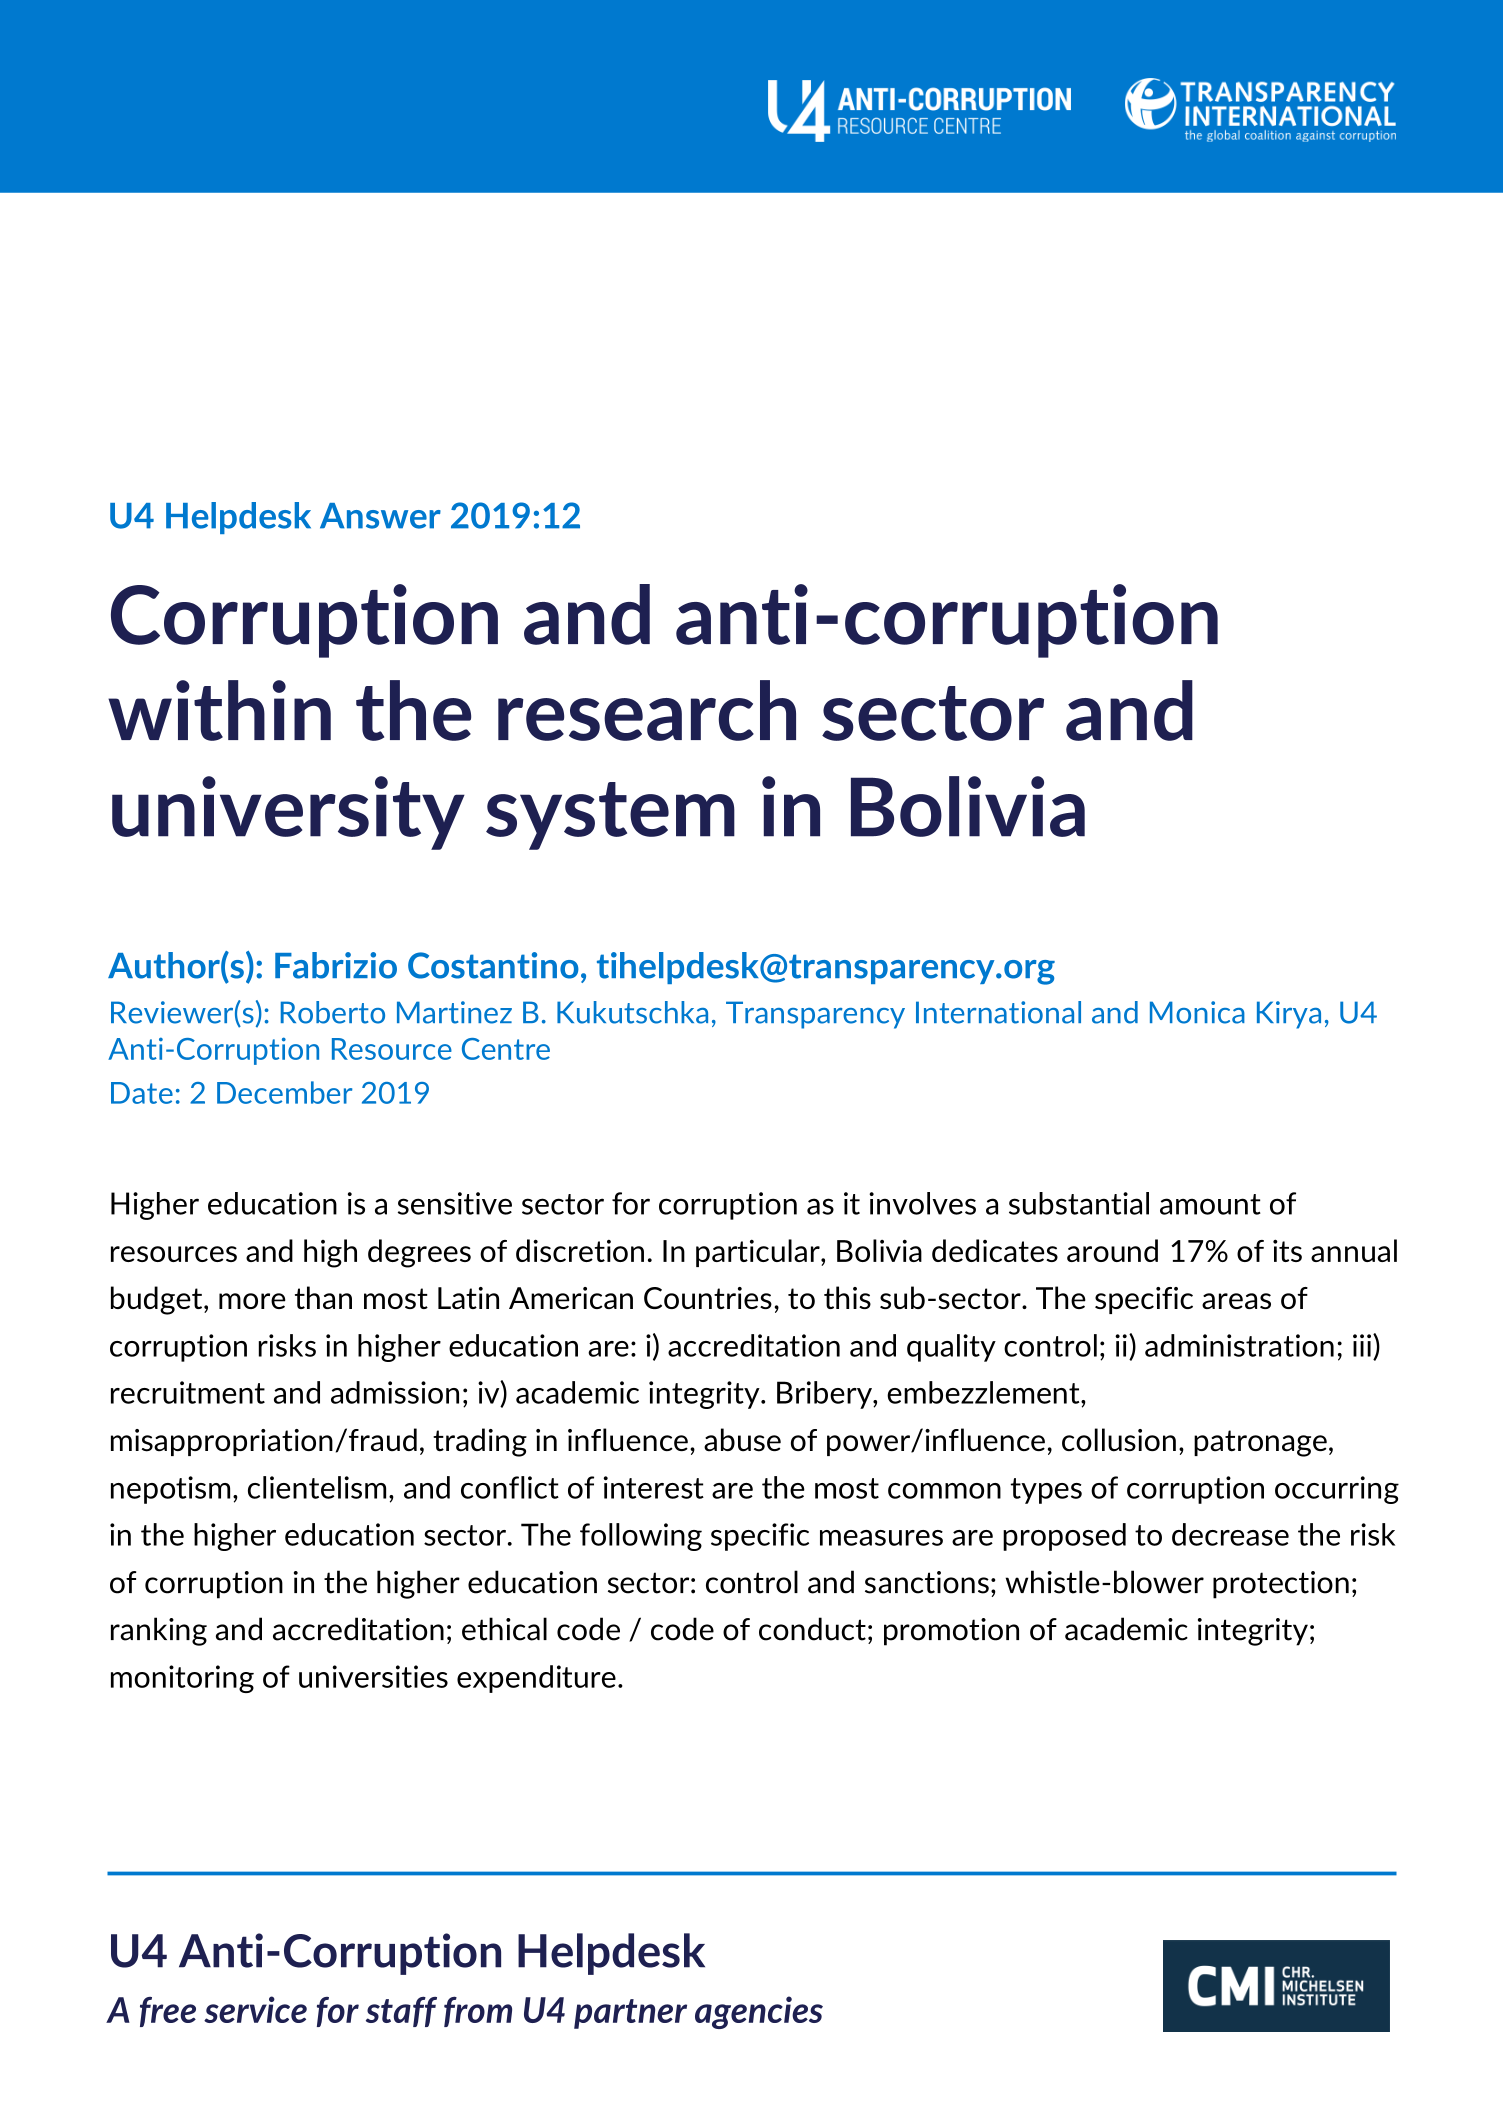 Corruption and anti-corruption within the research sector and university system in Bolivia